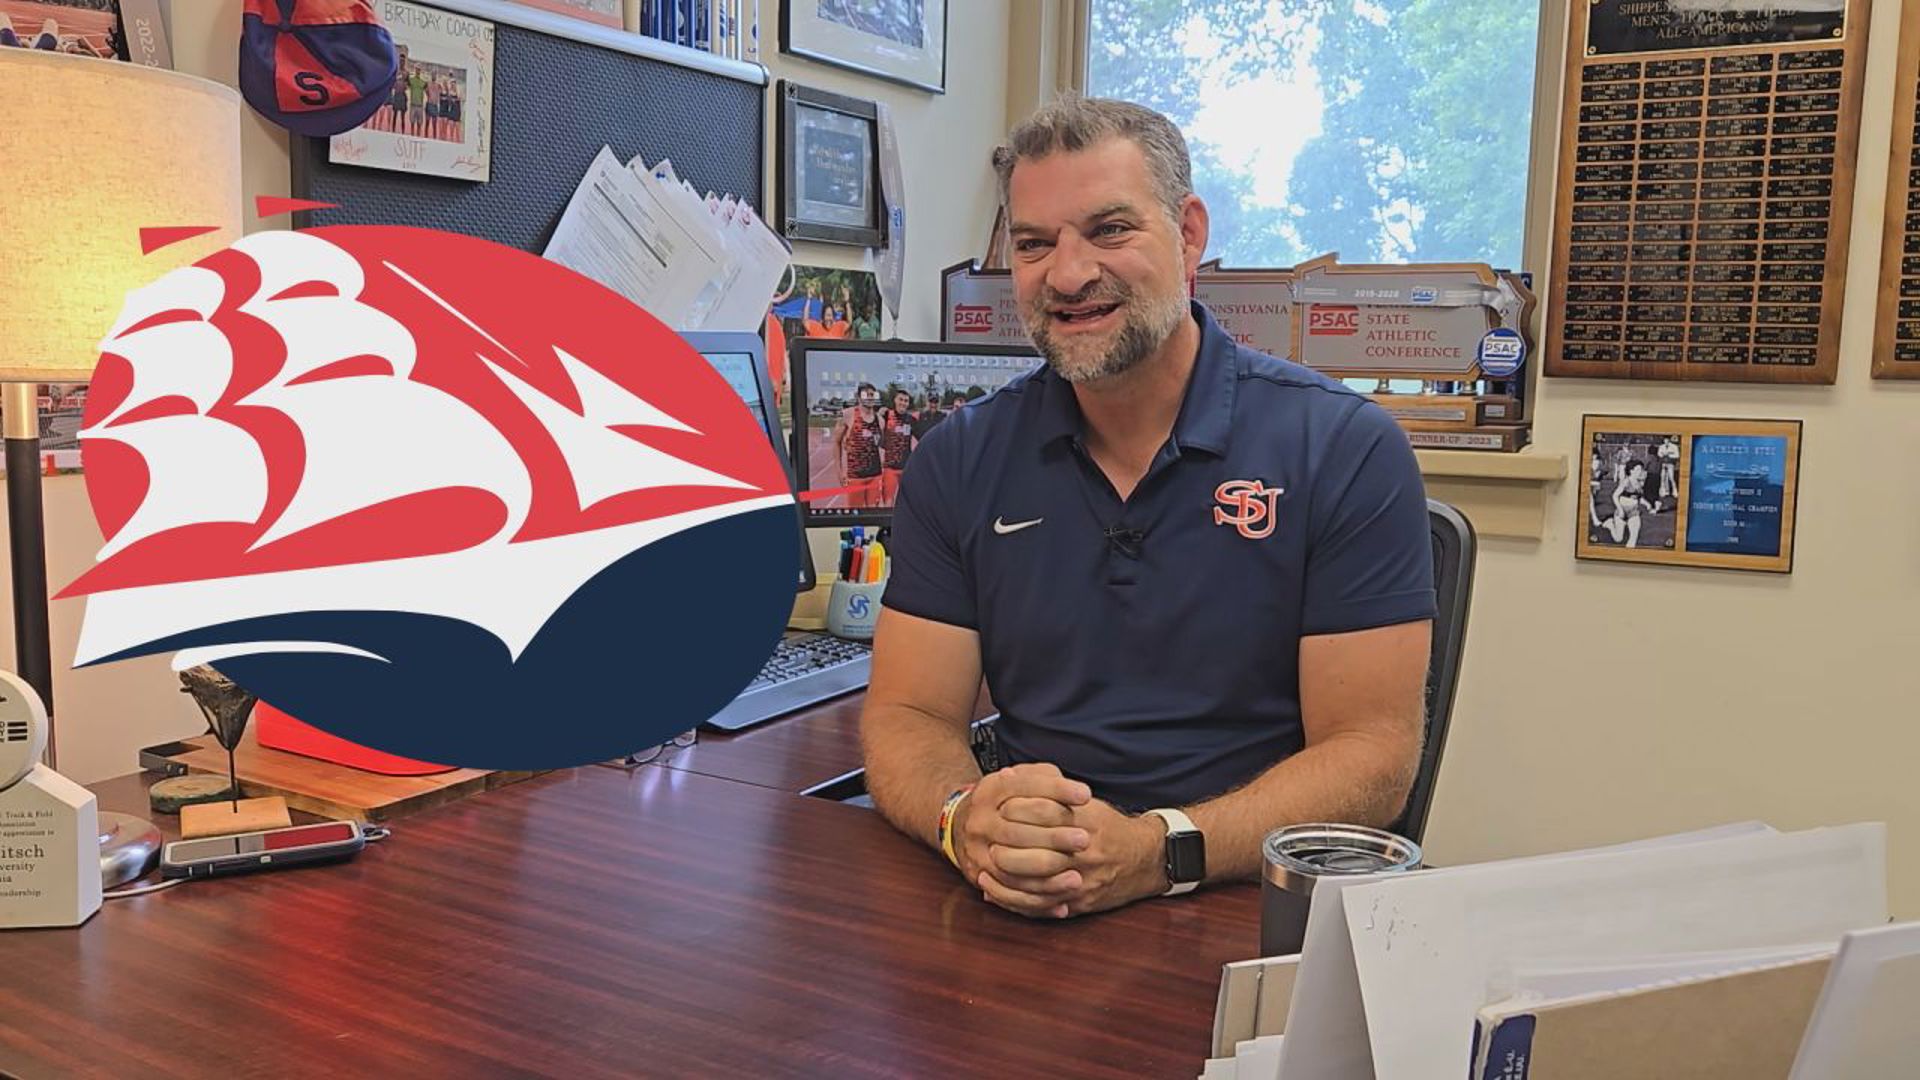 A choice between a career in law enforcement and coaching helped change the trajectory of the Shippensburg University Track and Field program.